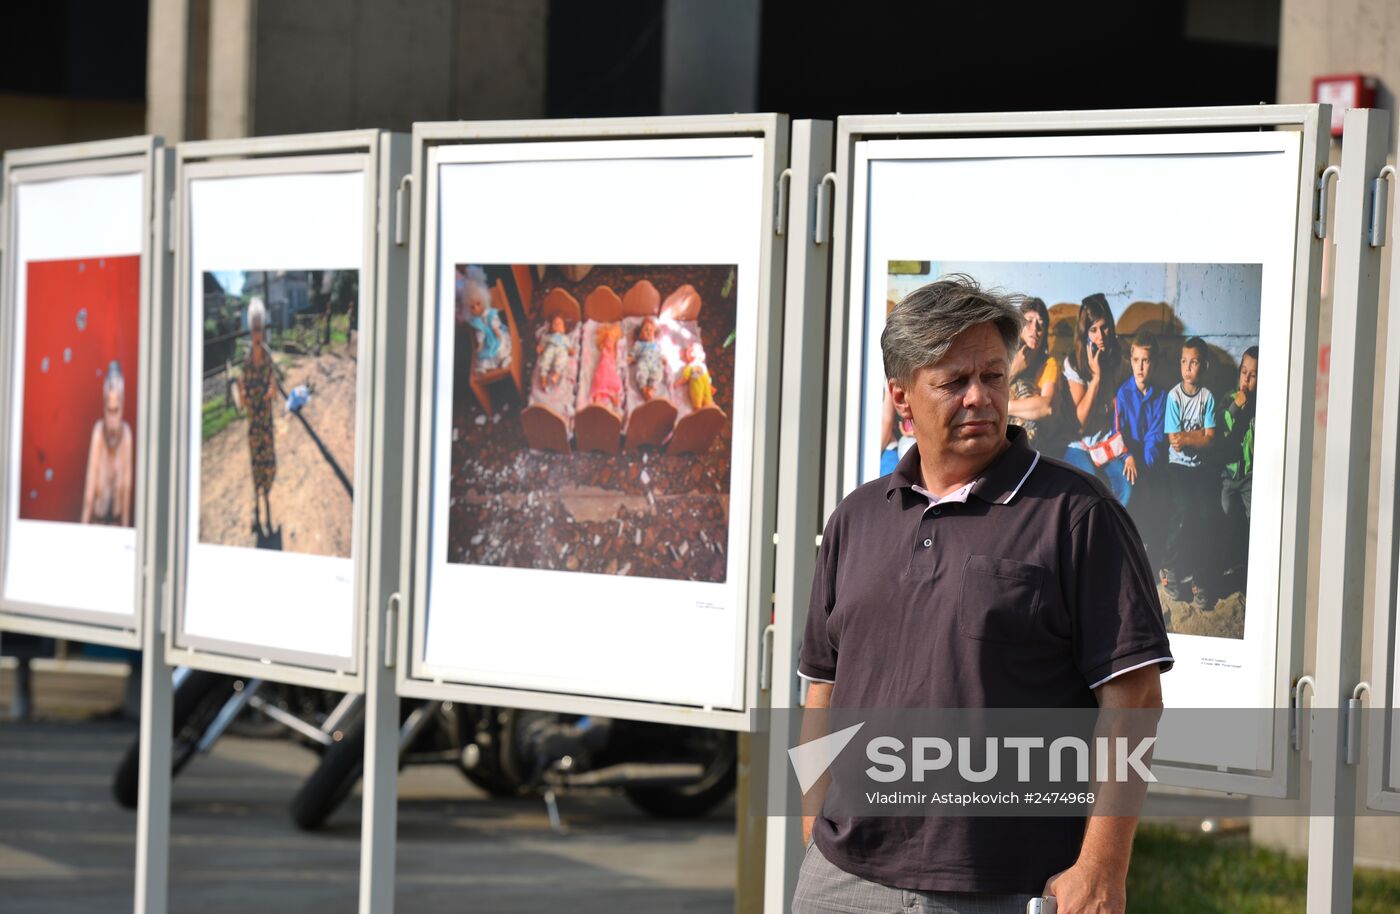 Exhibition of photos by press photographer Andrei Stenin